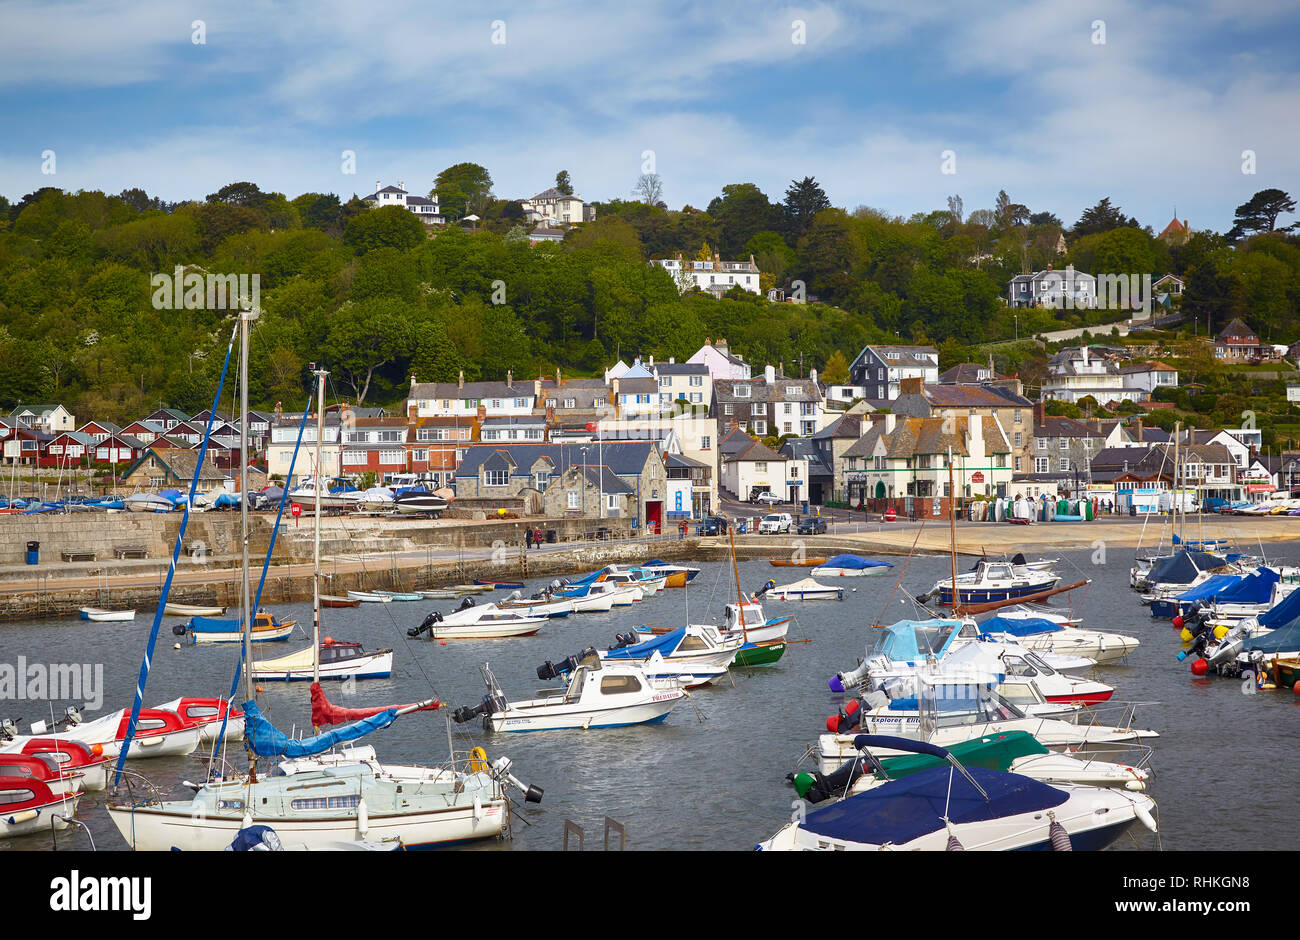 LYME REGIS, ENGLAND – MAY 12, 2009: The view of the famous Cobb harbor of Lyme Regis with the docked boats and yachts, with the Lyme Regis town on the Stock Photo